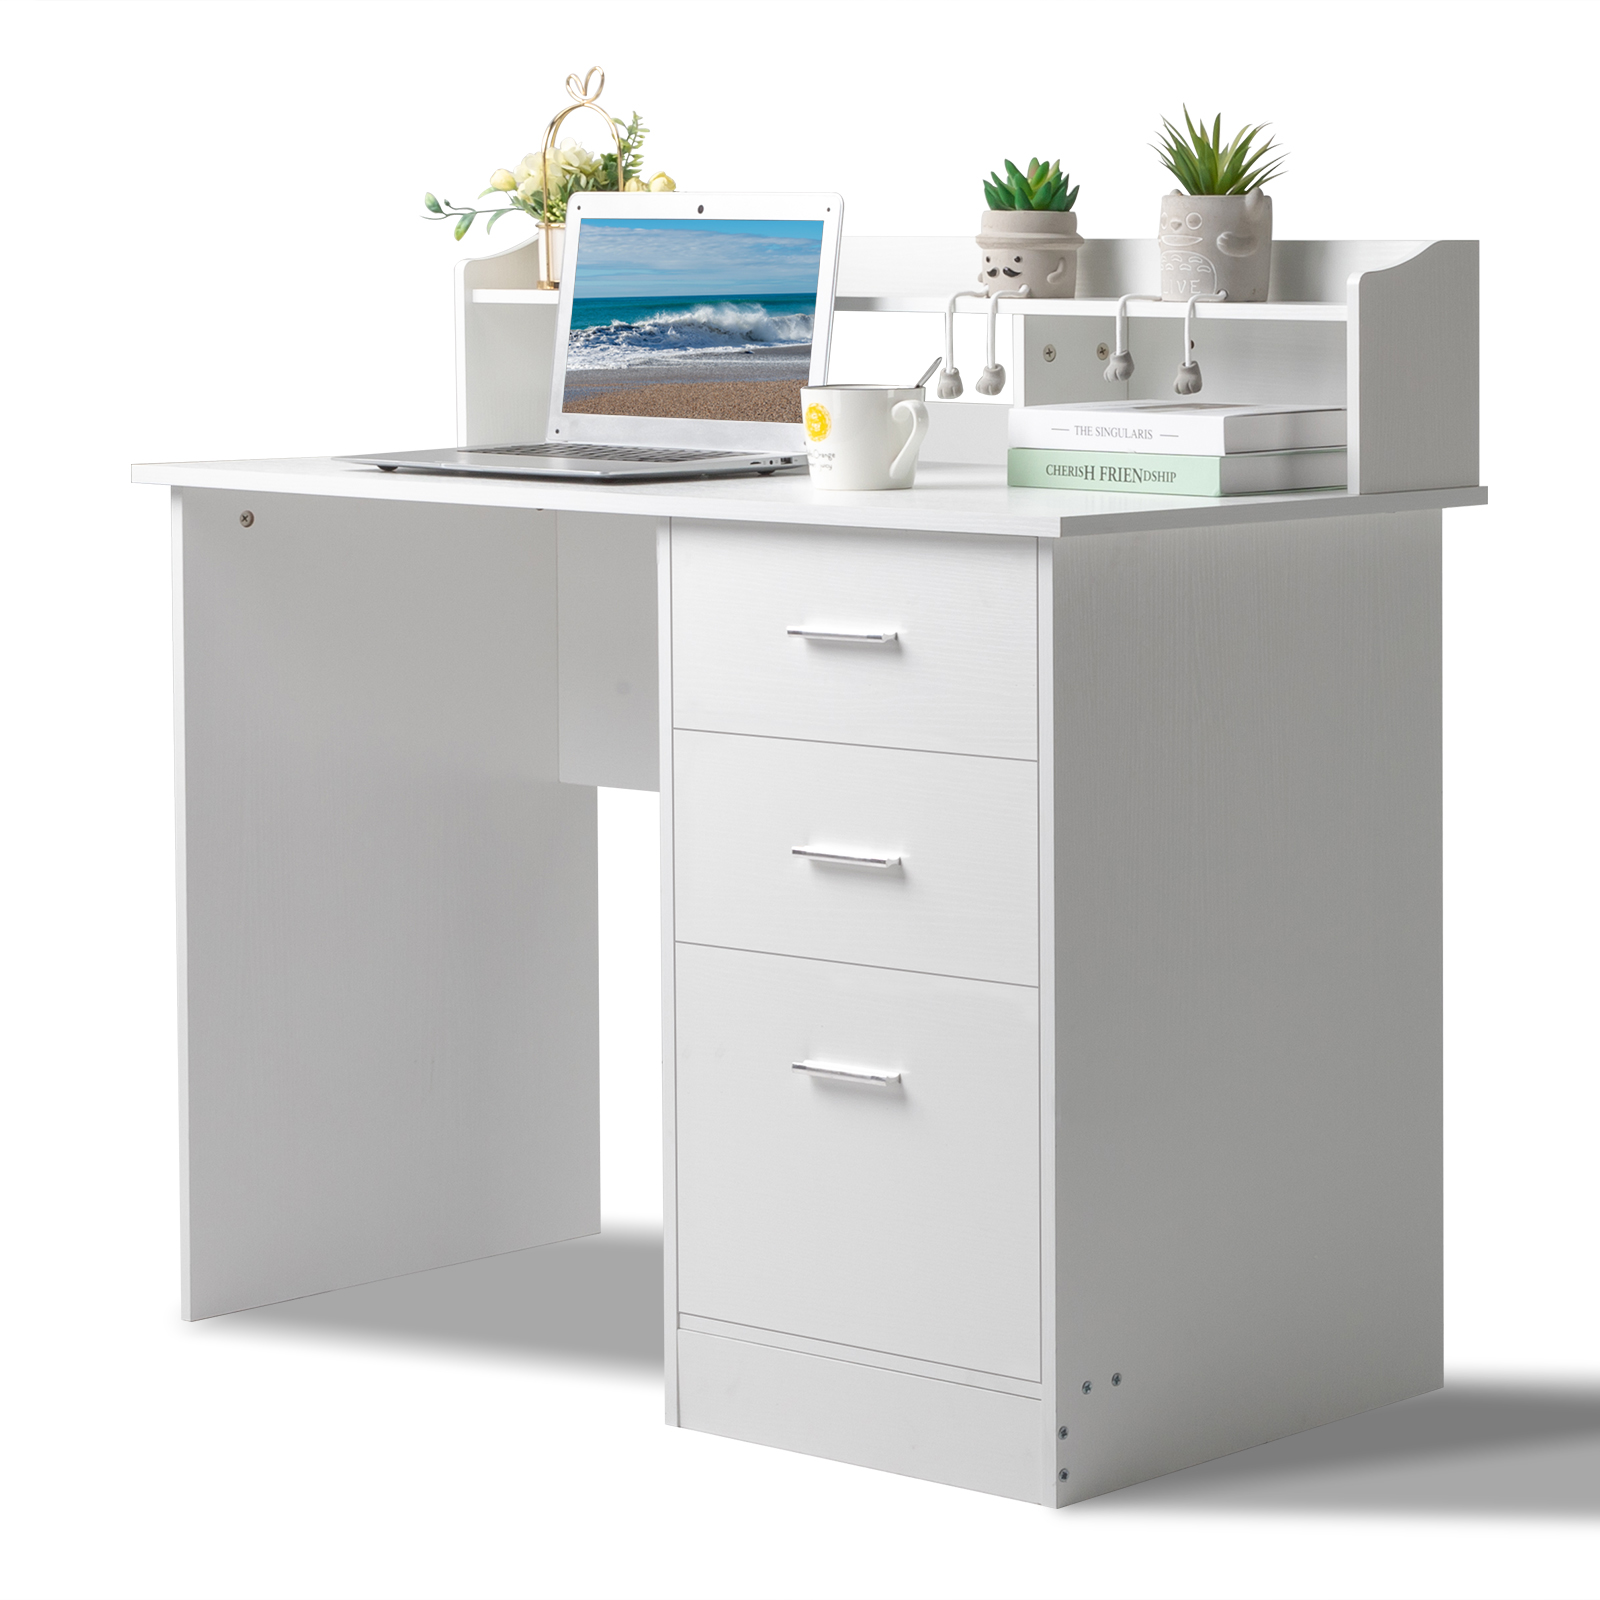 Ktaxon Wood Computer Desk Office Laptop PC Work Table, Writing Desk with 3 Drawers File Cabinet for Letter Size,White - image 3 of 10